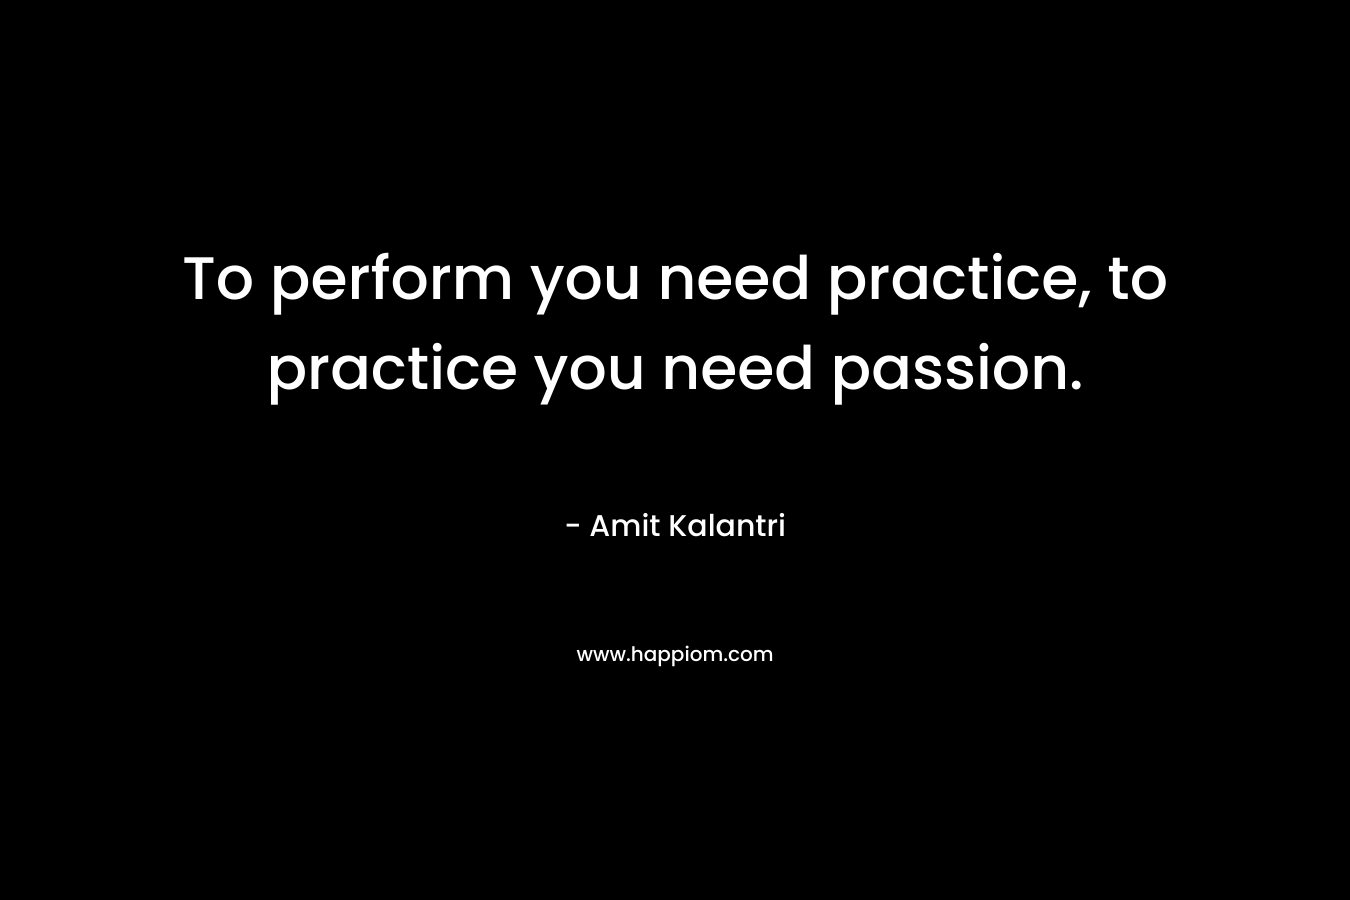 To perform you need practice, to practice you need passion.